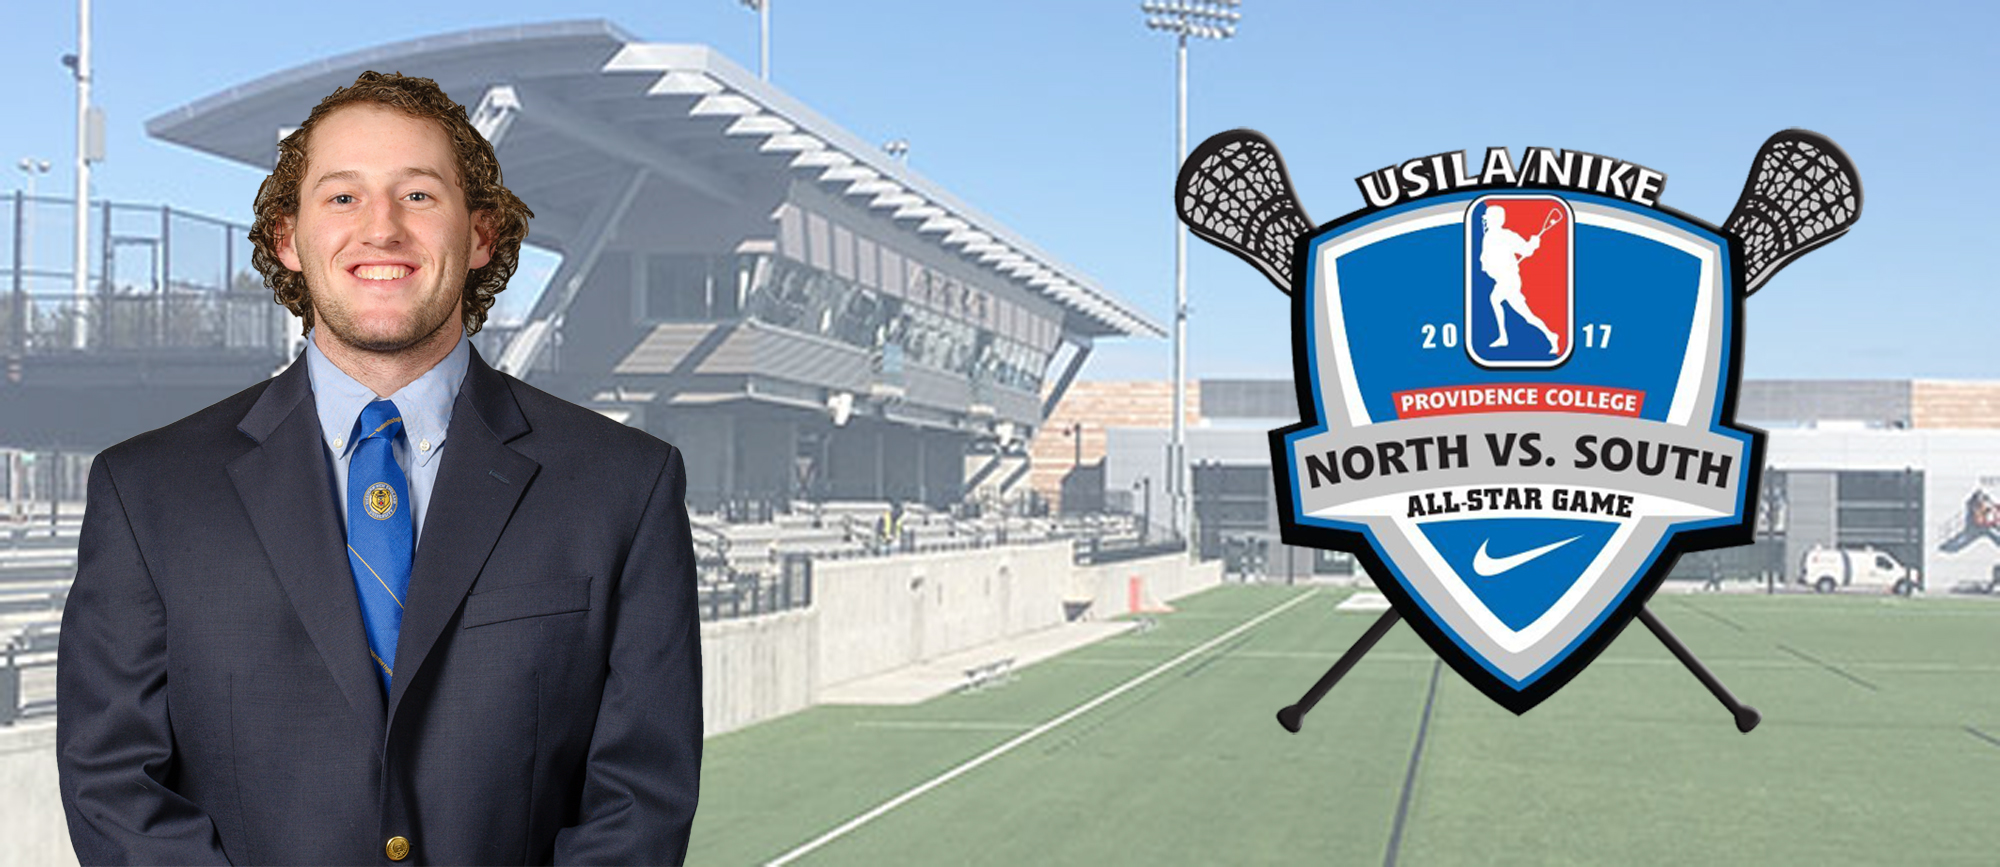 Senior Keegan Dudeck will represent Western New England at the USILA/Nike DIII North-South All-Star Game on Friday, May 26 at Providence College.